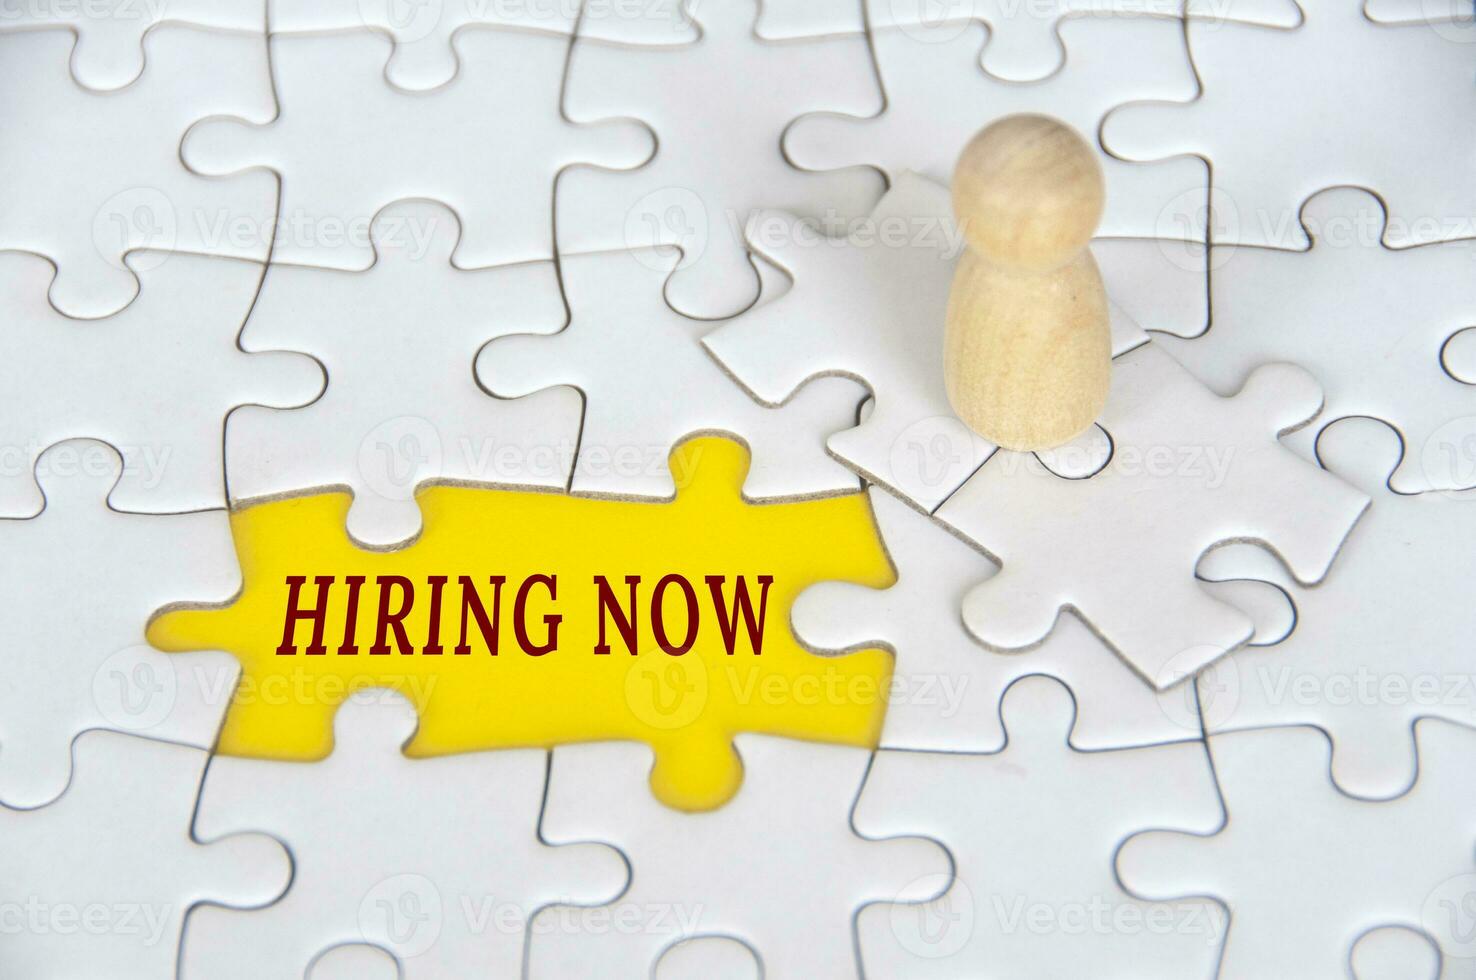 Hiring now text on missing jigsaw puzzle with wooden figure background. Employment concept photo